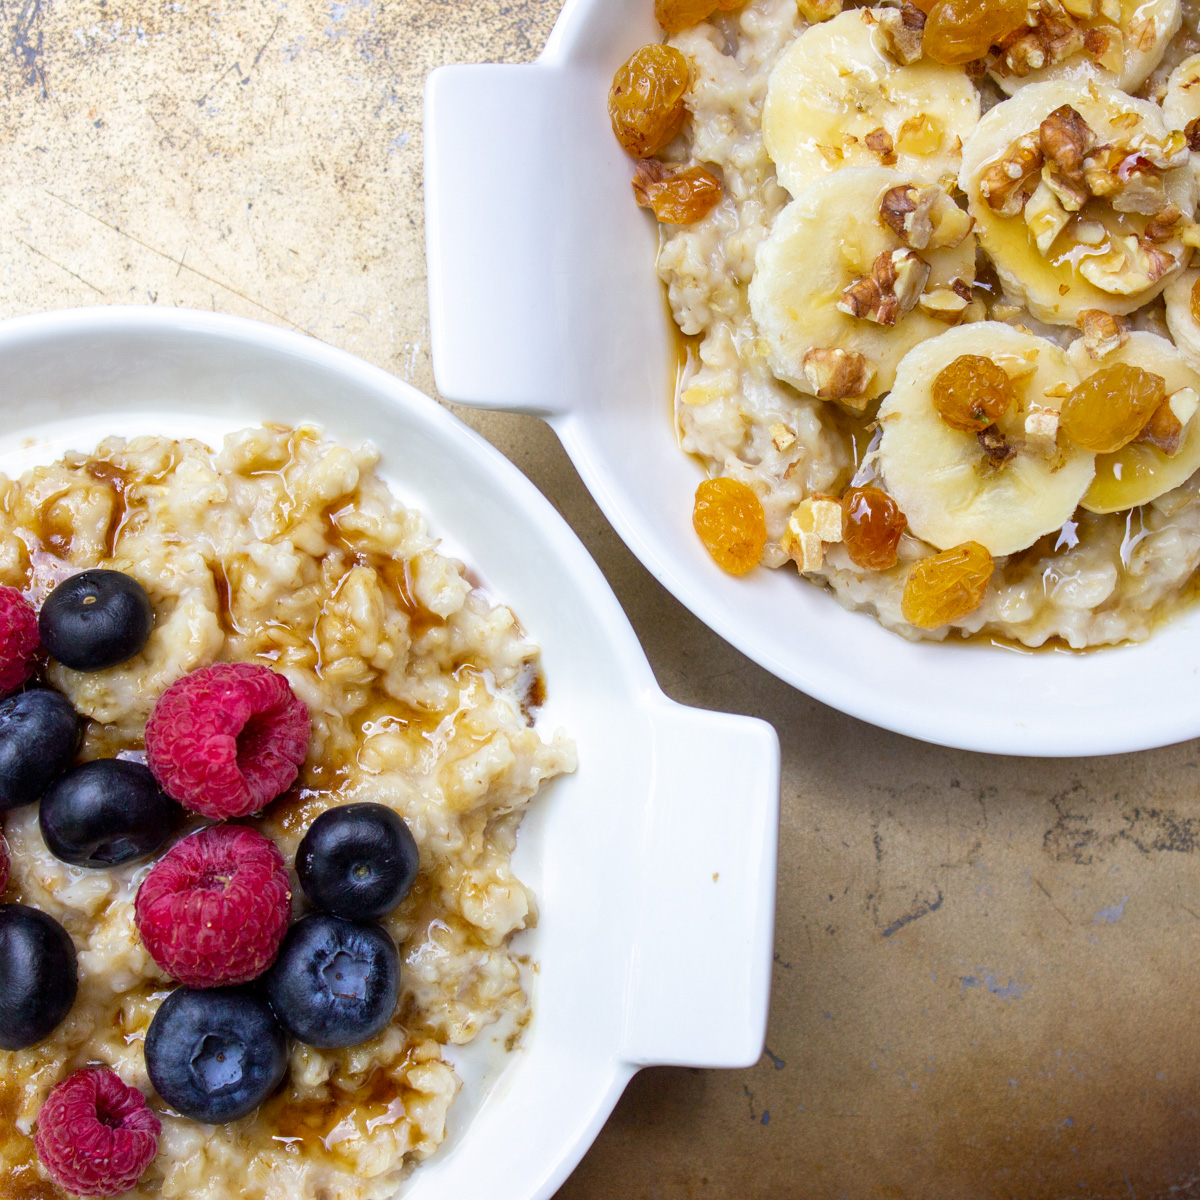 2 bowls of oatmeal, one with berries, one with bananas and raisins and nuts